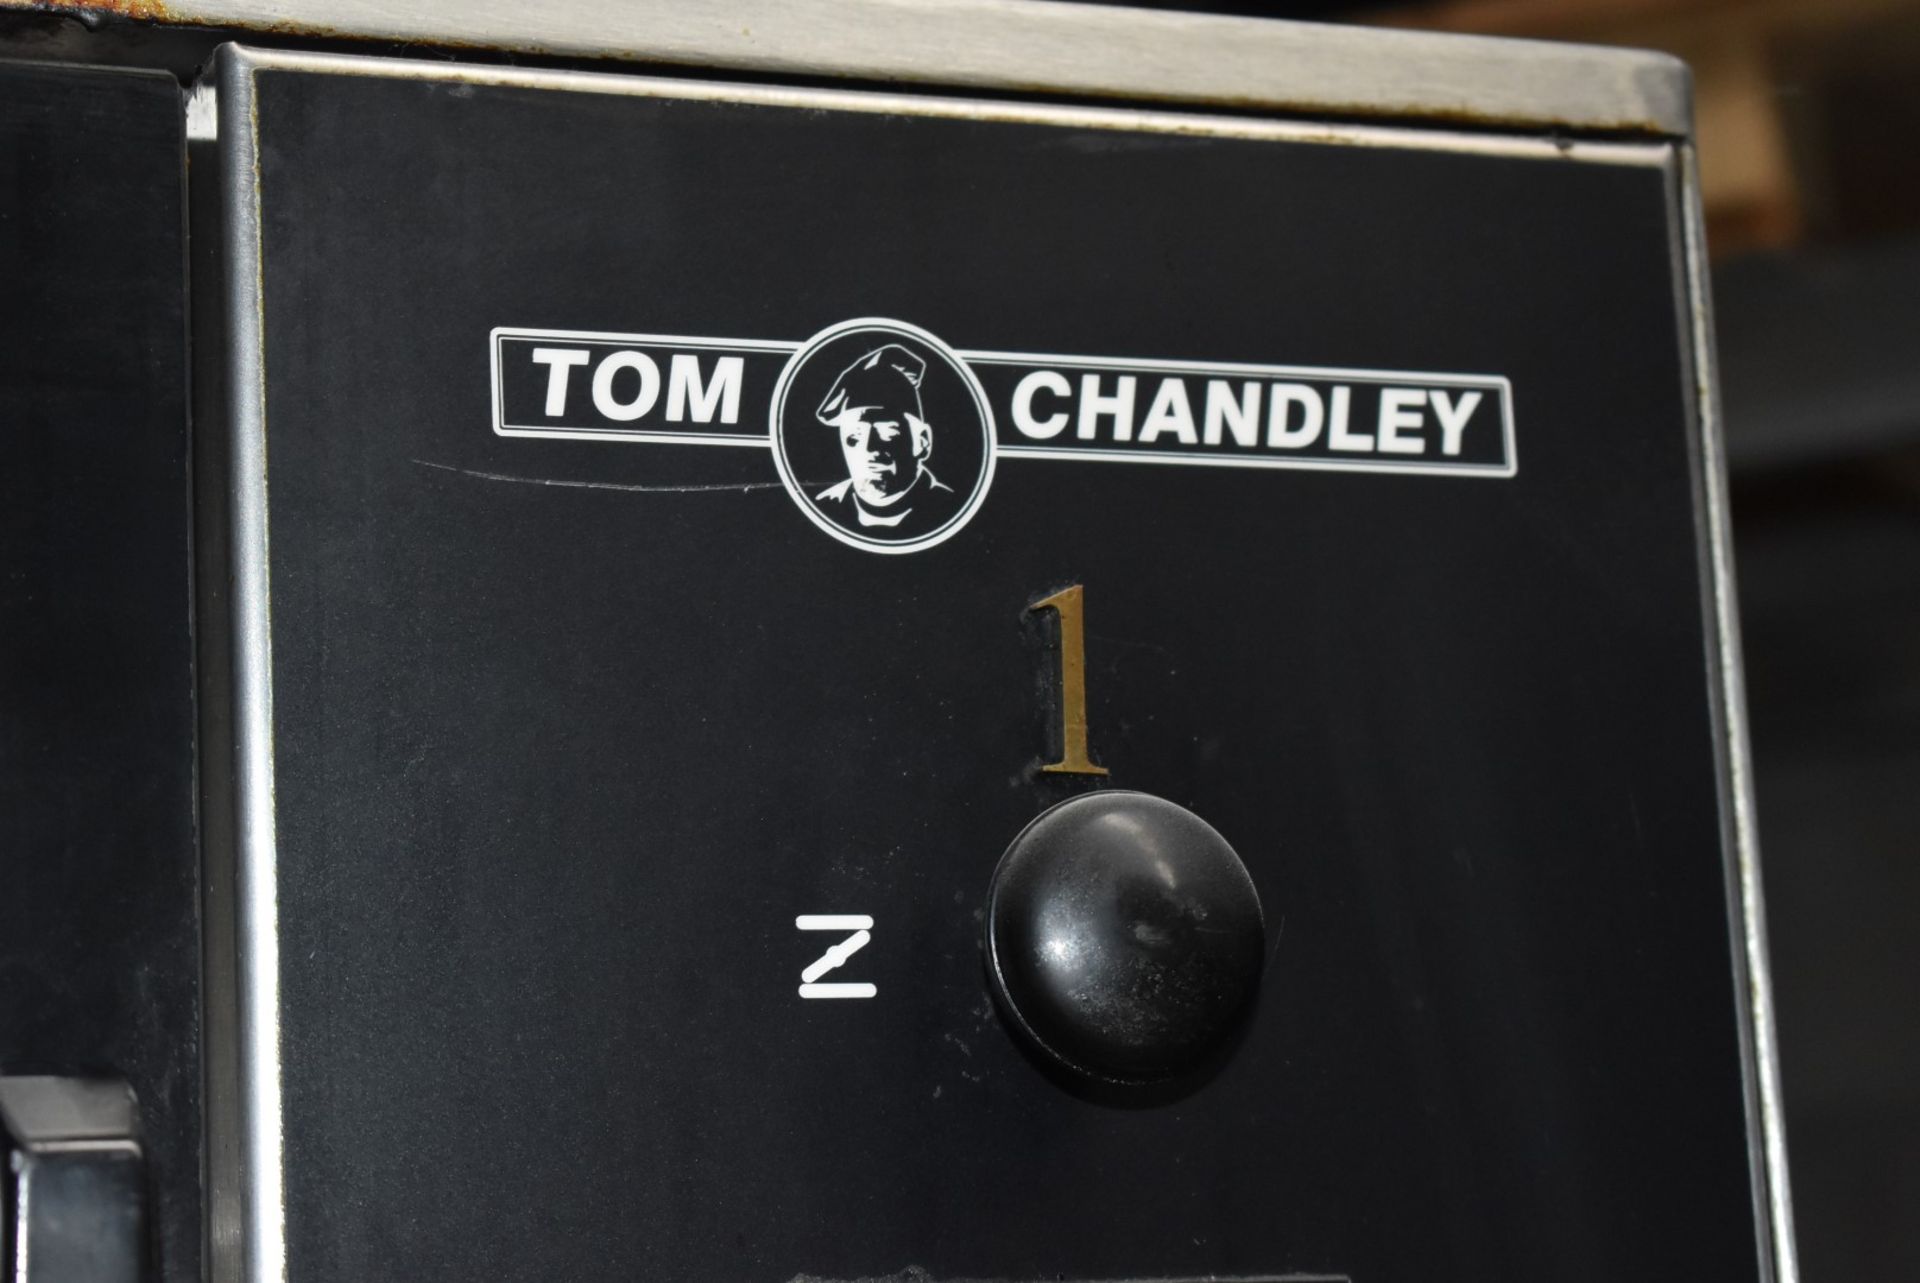 1 x Tom Chandley TC5 Double Convection Bakery Oven - Recently Removed From a Major Supermarket Store - Image 8 of 14